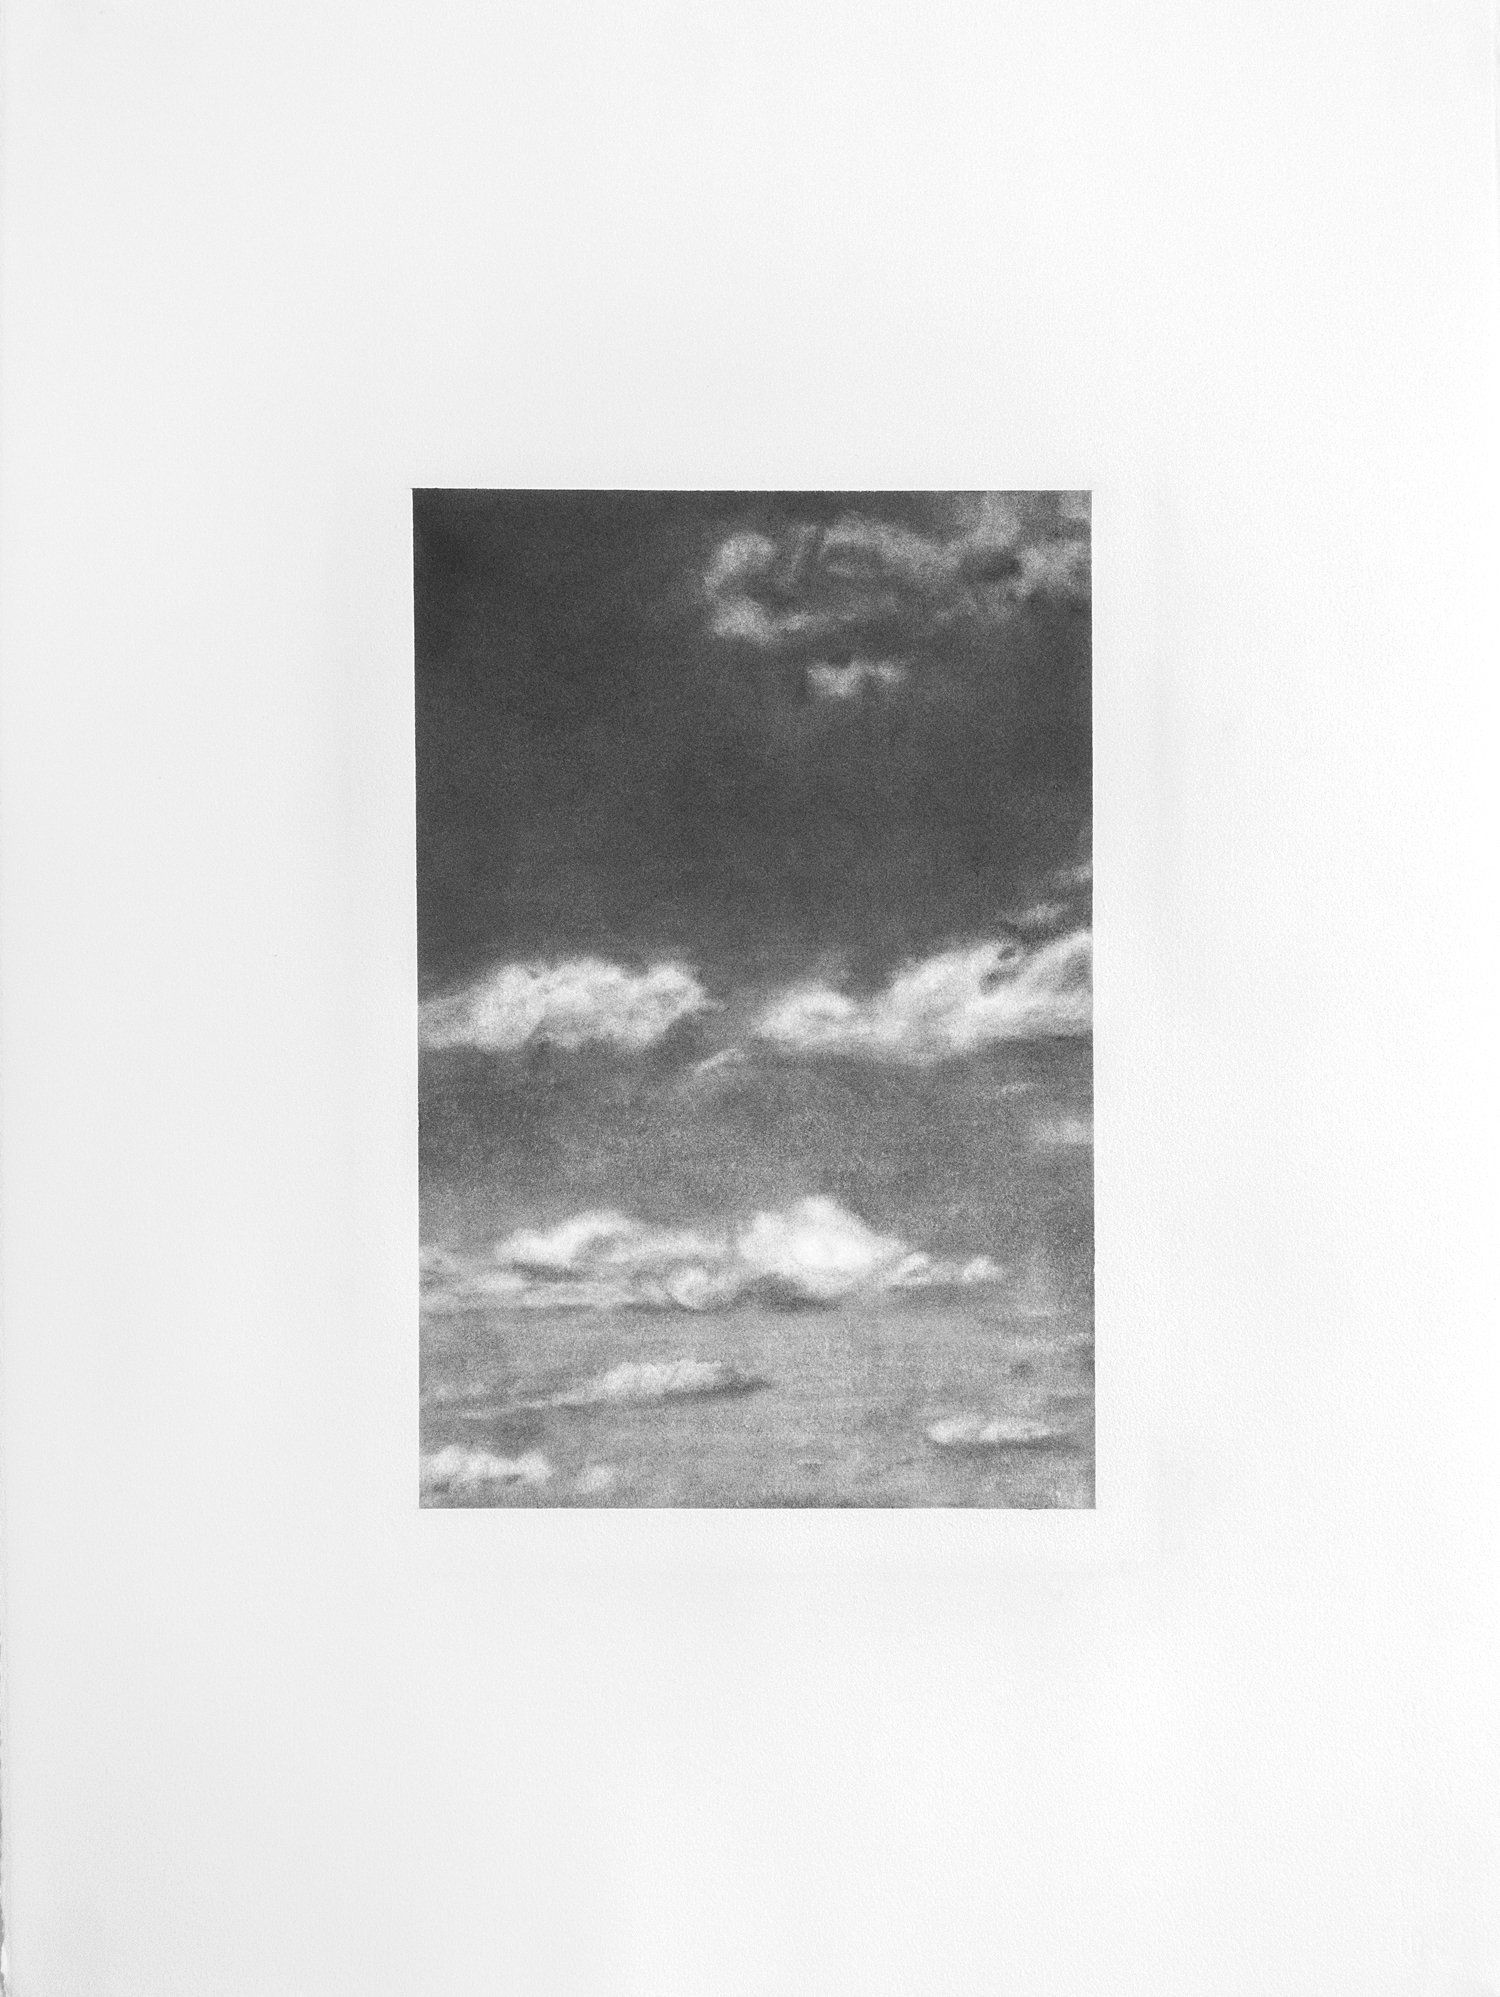   John MacConnell,  Clouds  (Fire Island Pines), 2020, graphite on Rives BFK, 30"x22"   Inquire  